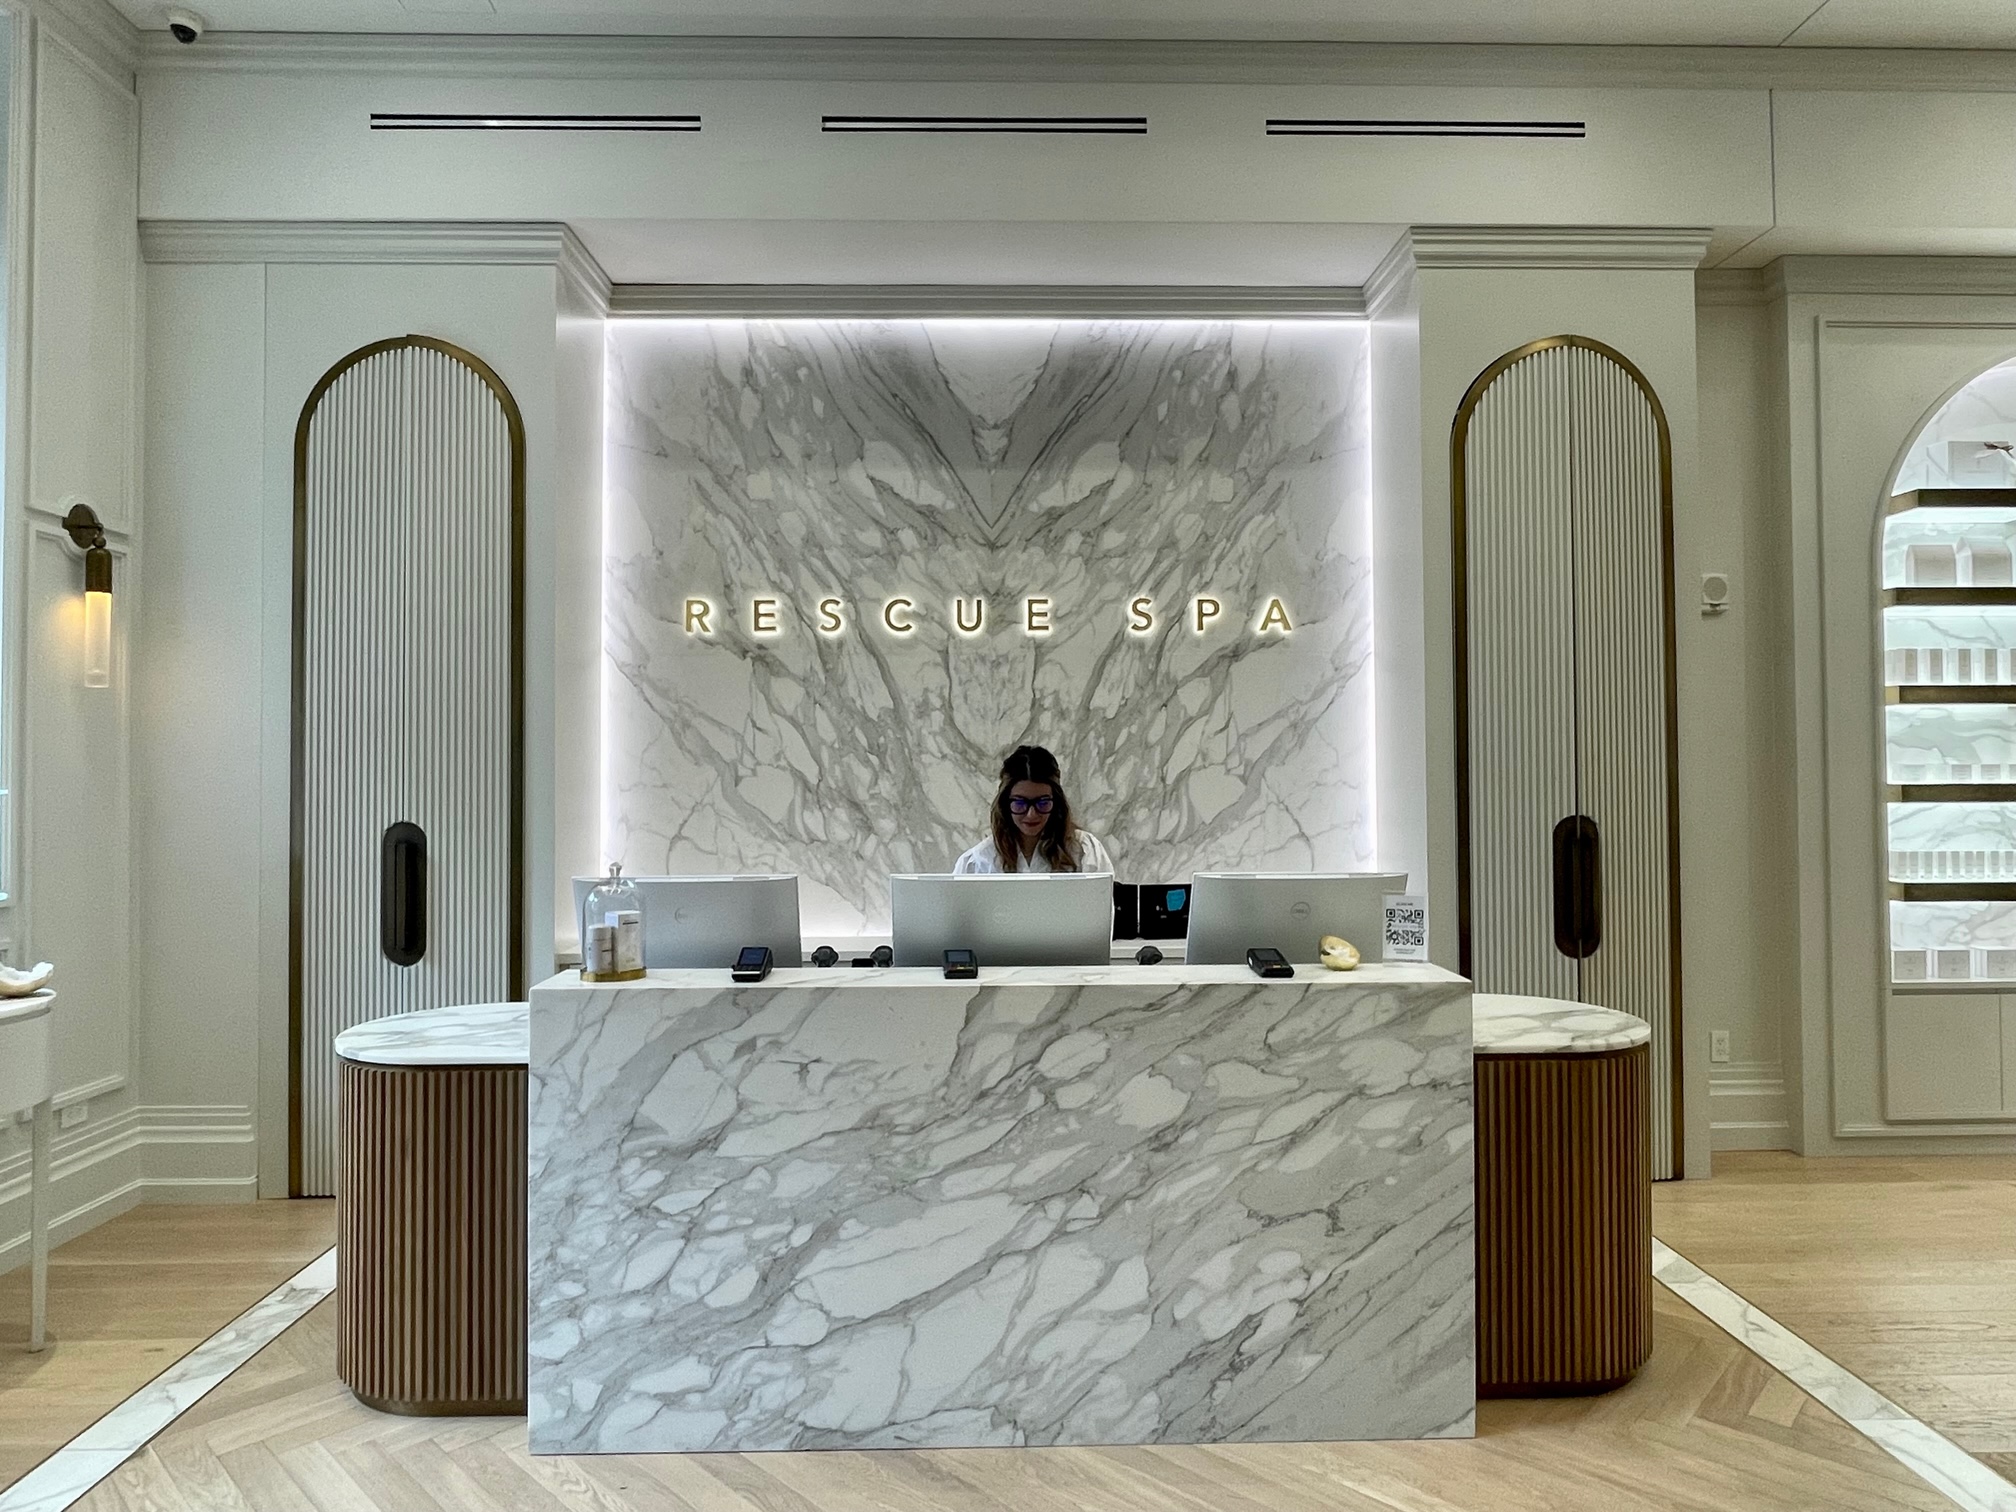 5 things to know about Philly's new luxury boutique, Rescue Spa